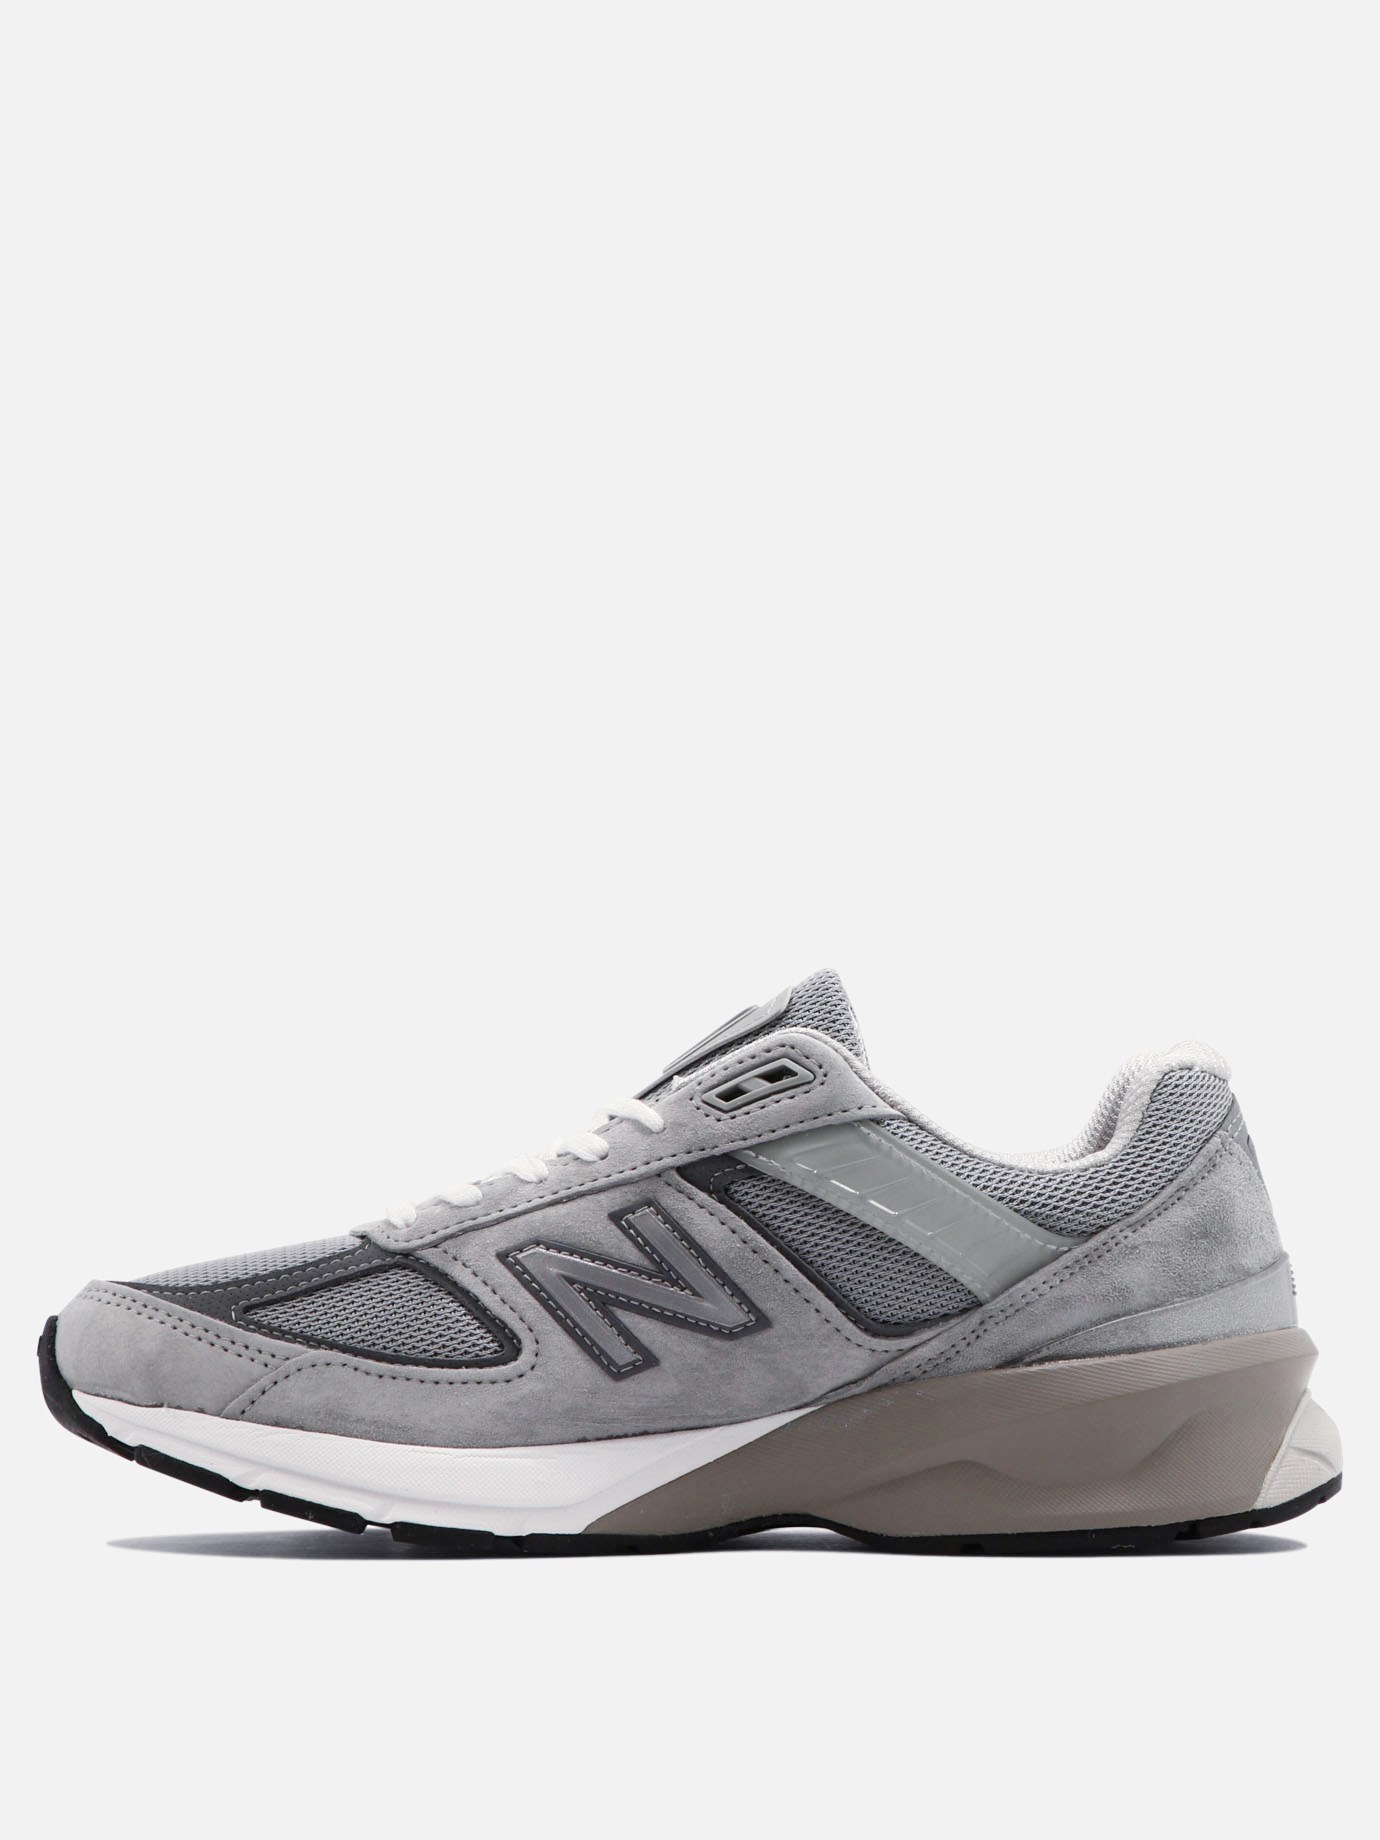 Sneaker  M990  by New Balance